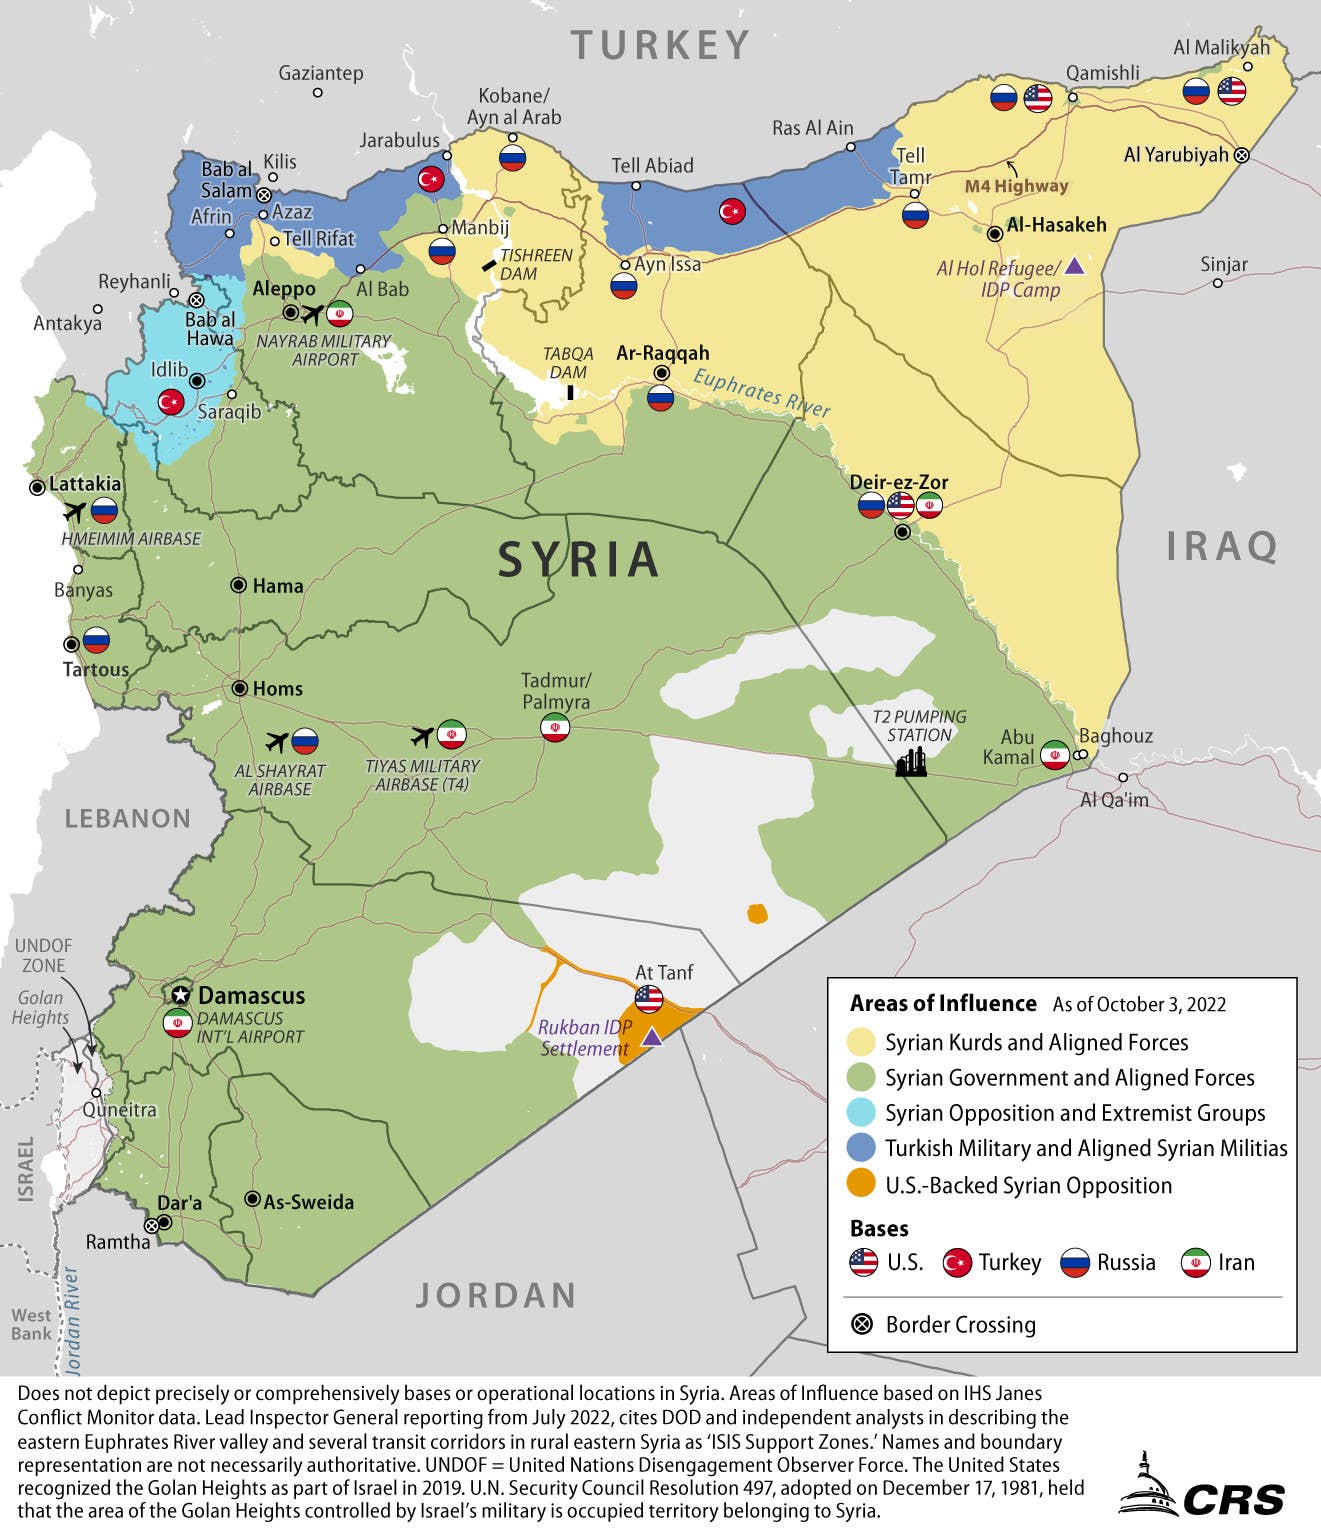 A map showing the general disposition of US, Russian, and other forces in Syria as of October 2022. Qamishili is seen marked with both US and Russian flags in the northeast concern of the country. <em>Congressional Research Service</em>